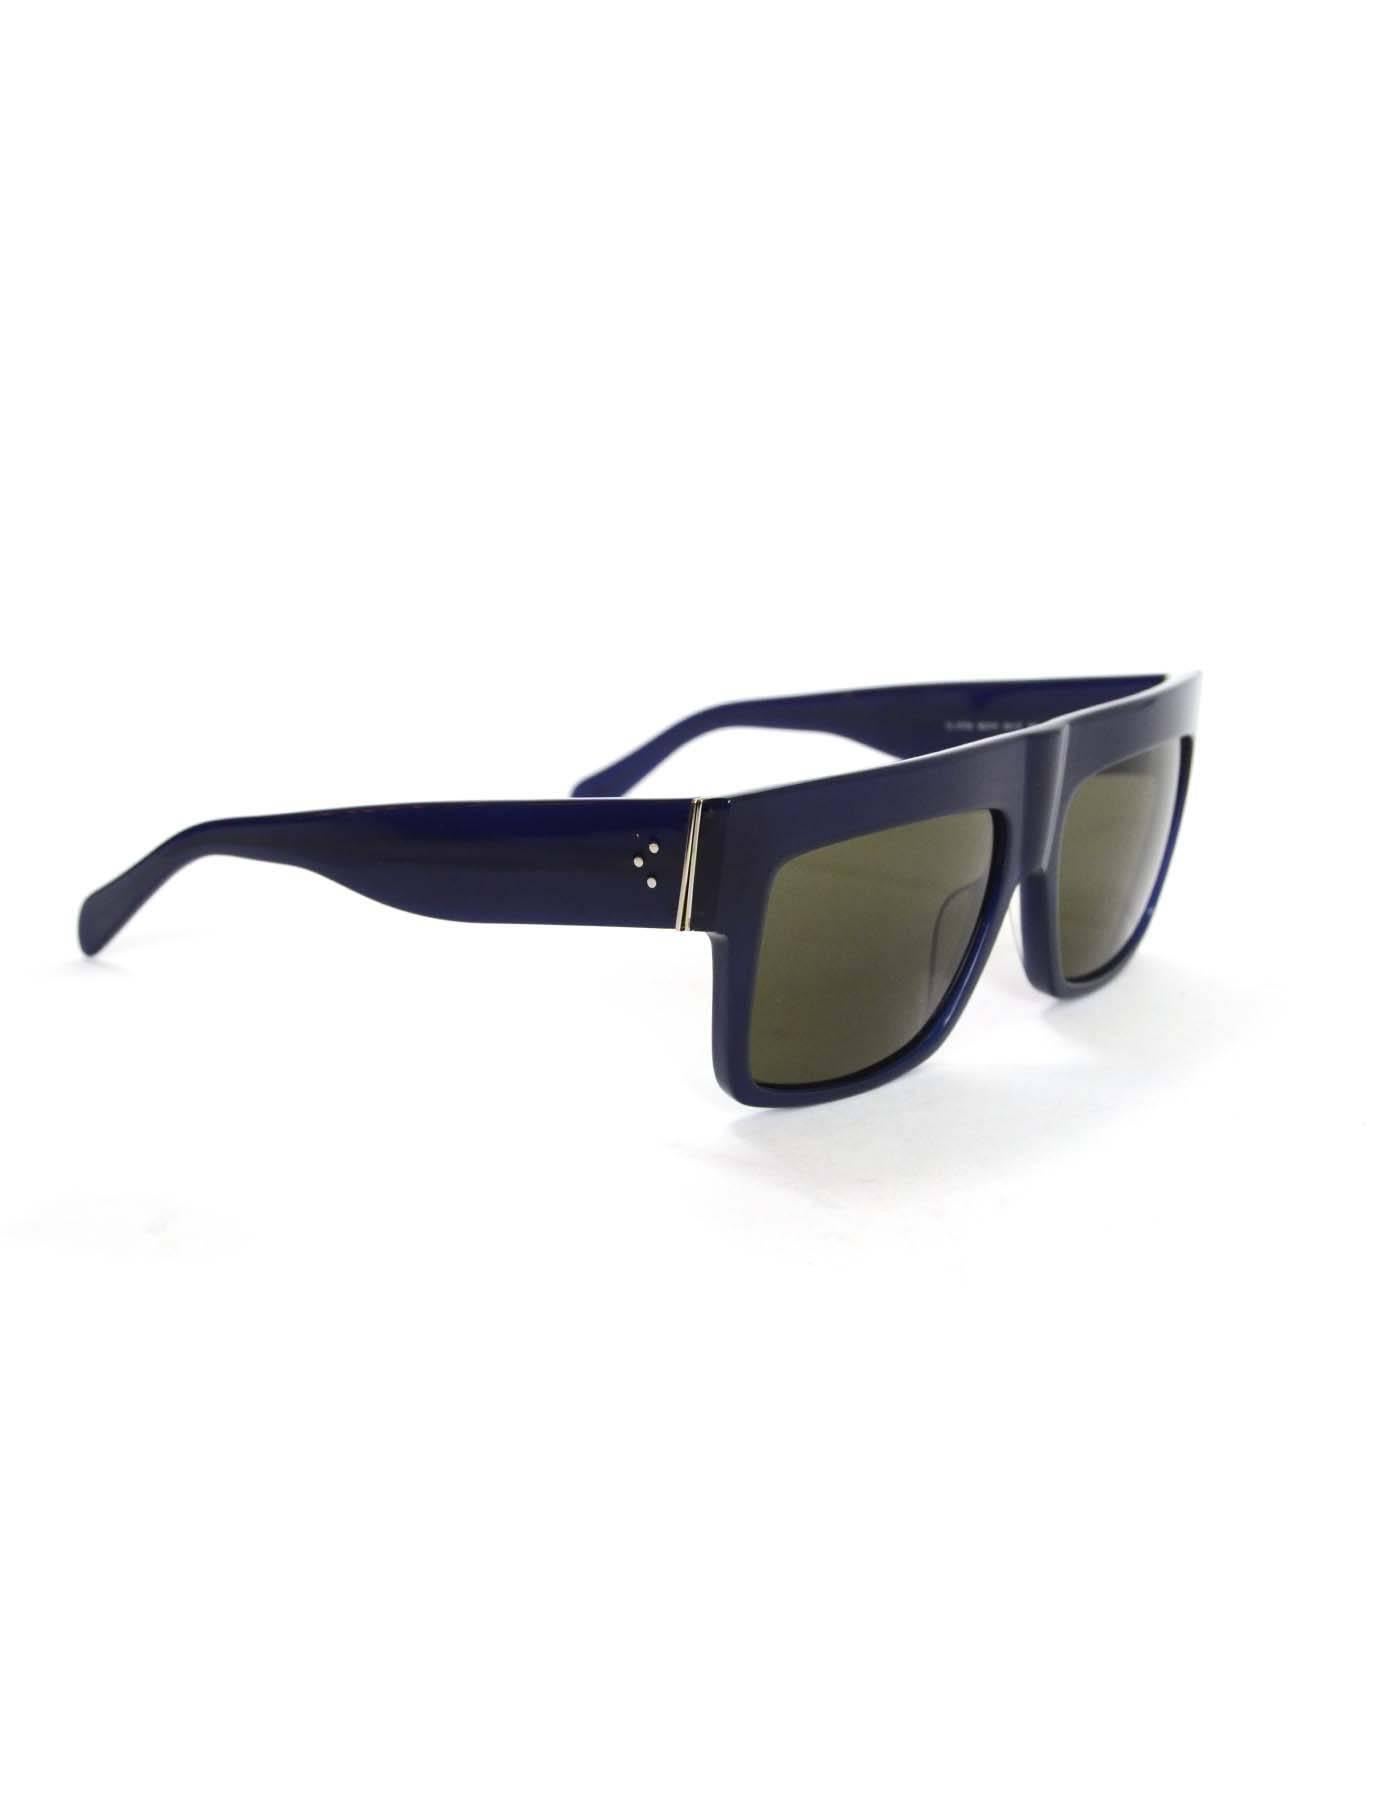 Celine Blue Zz Top Square Sunglasses
Made In: Italy
Color: Blue
Materials: Resin
Stamp: Left arm- CL 41756 M2370 56 17 145< Right arm- Celine Made in Italy
Retail Price: $400 + tax
Overall Condition: Excellent pre owned condition with the